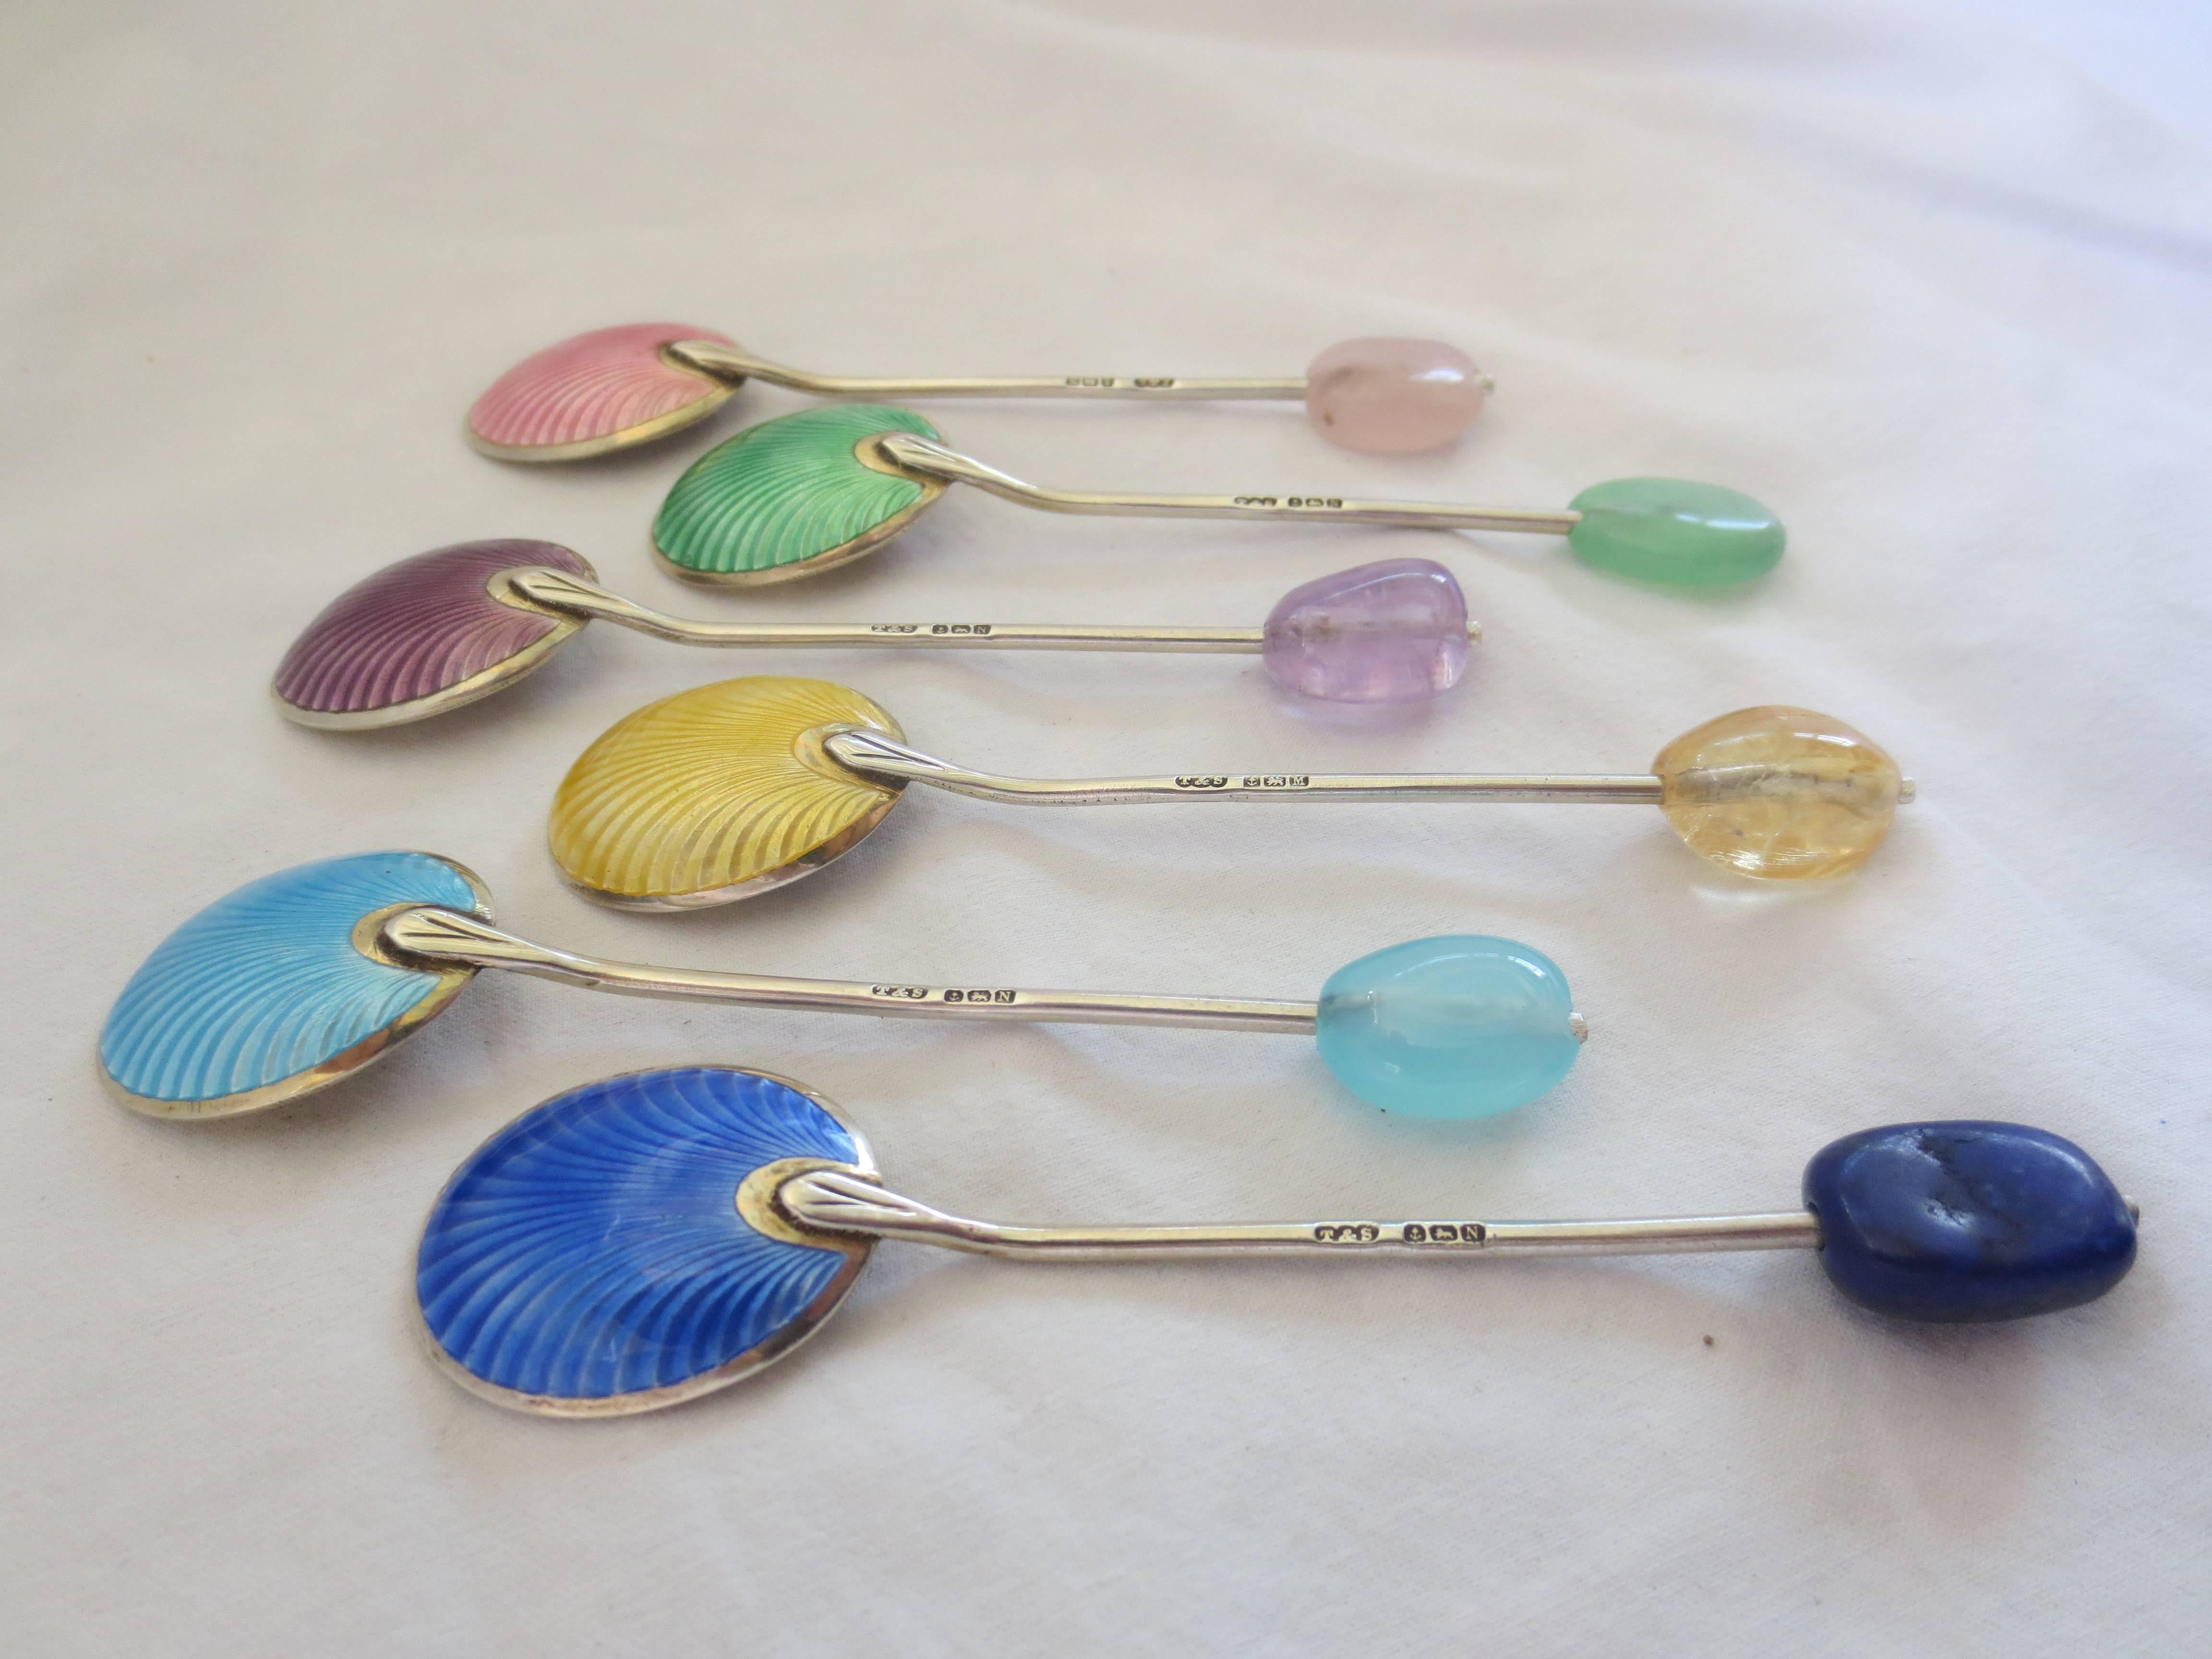 Women's or Men's One-of-a-kind Enameled Silver Spoons Refurbished with Semi precious stone beads.